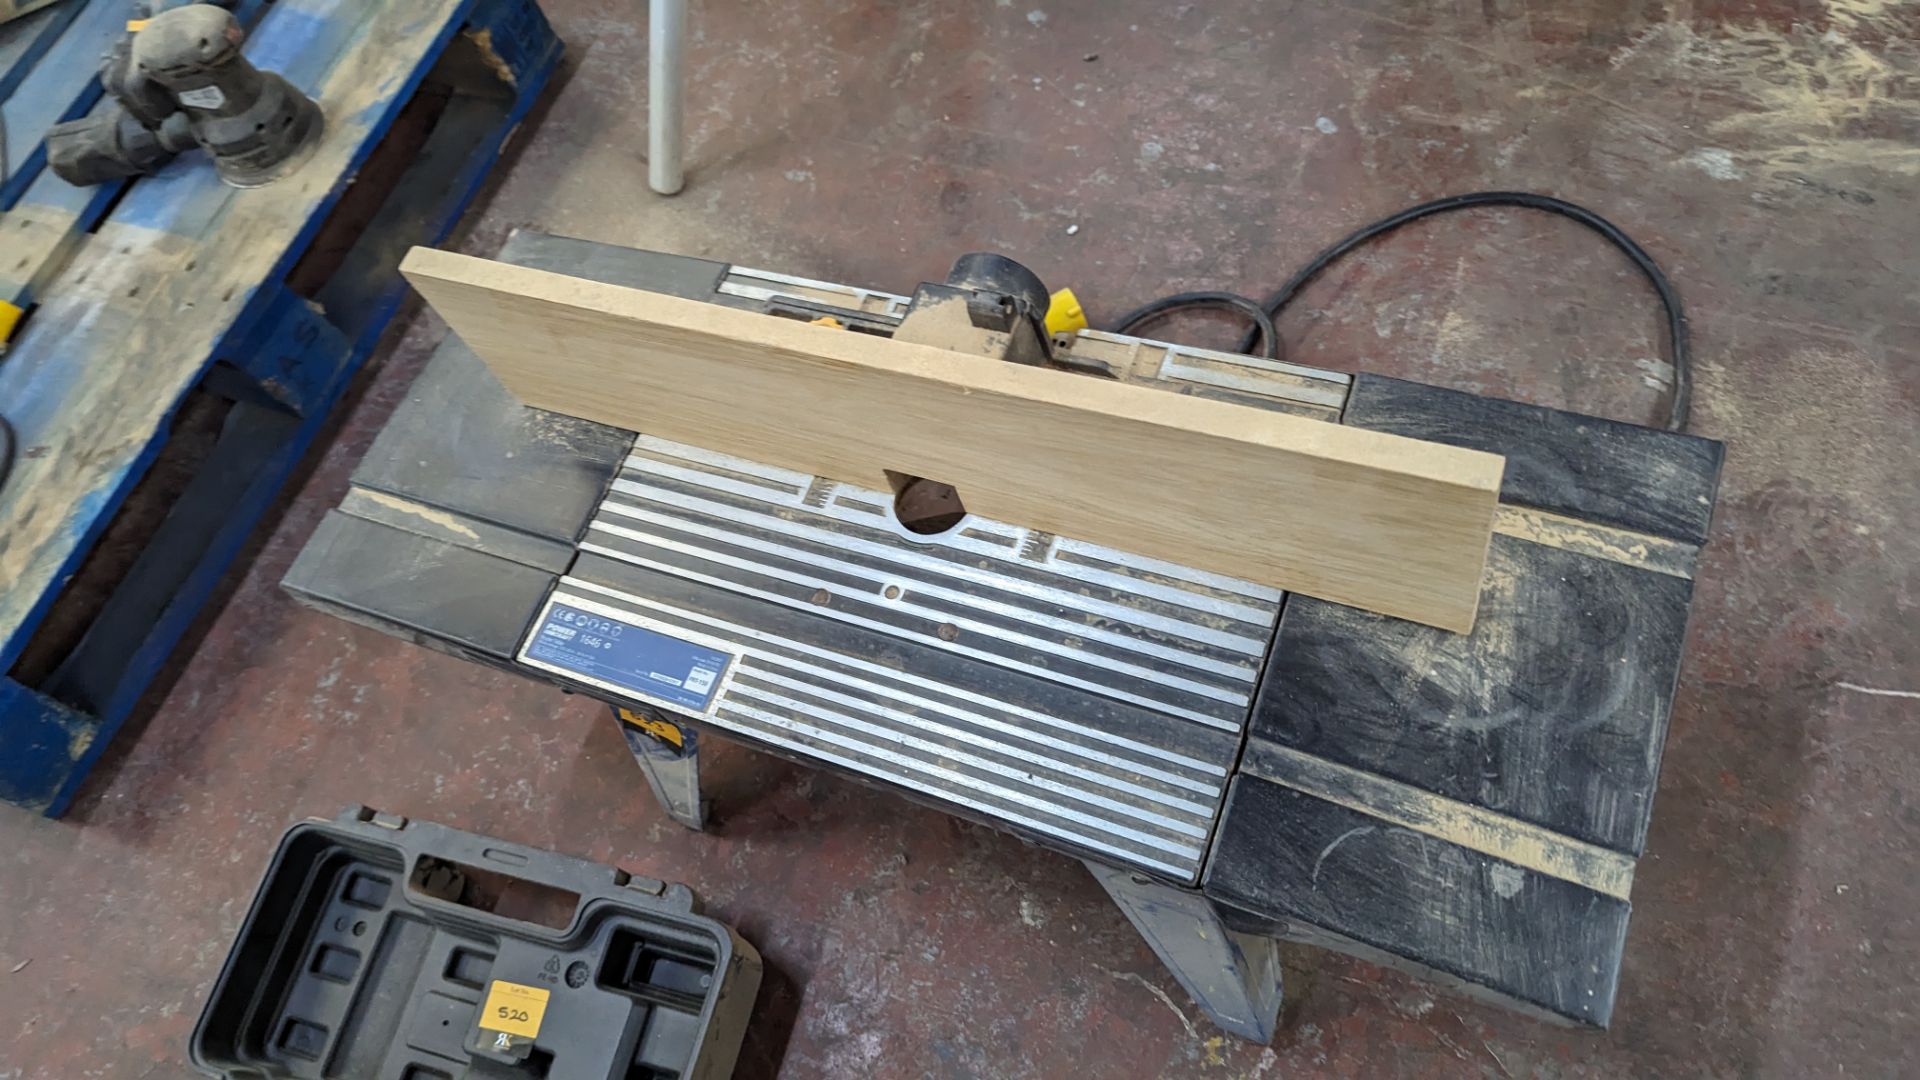 Trend 110V router including router table to which it is mounted - Image 6 of 8